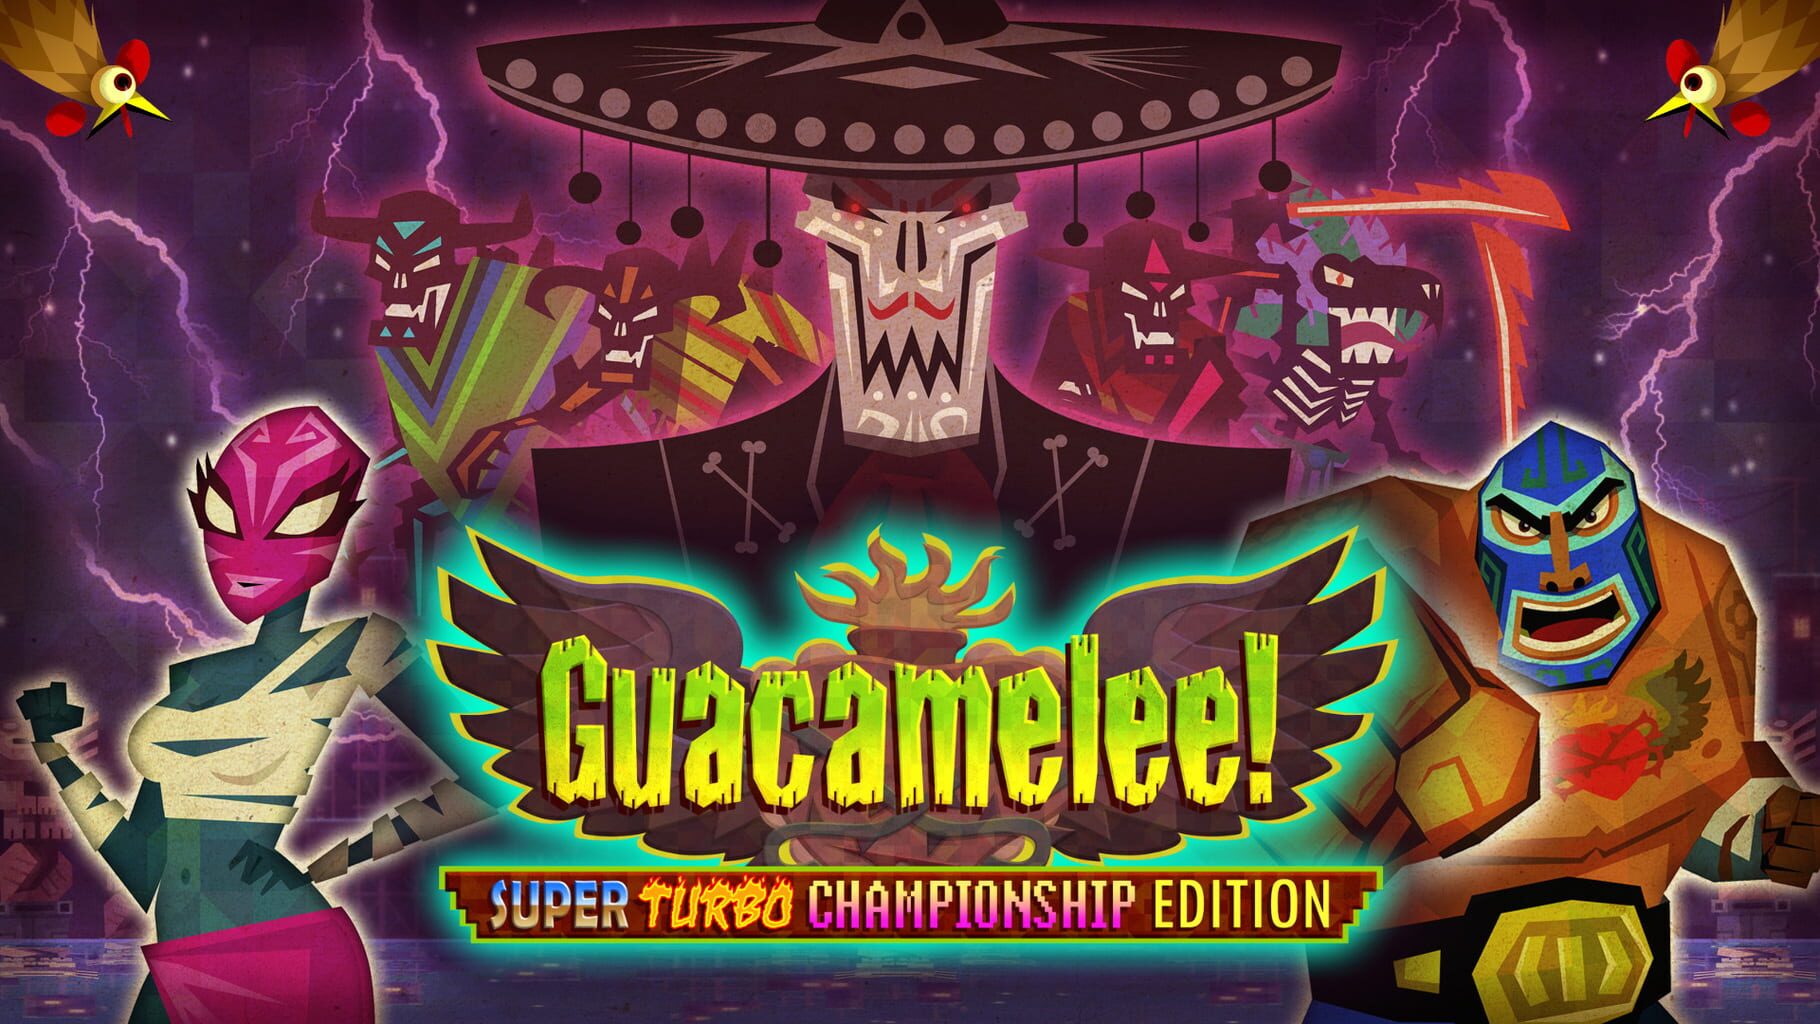 Artwork for Guacamelee! Super Turbo Championship Edition